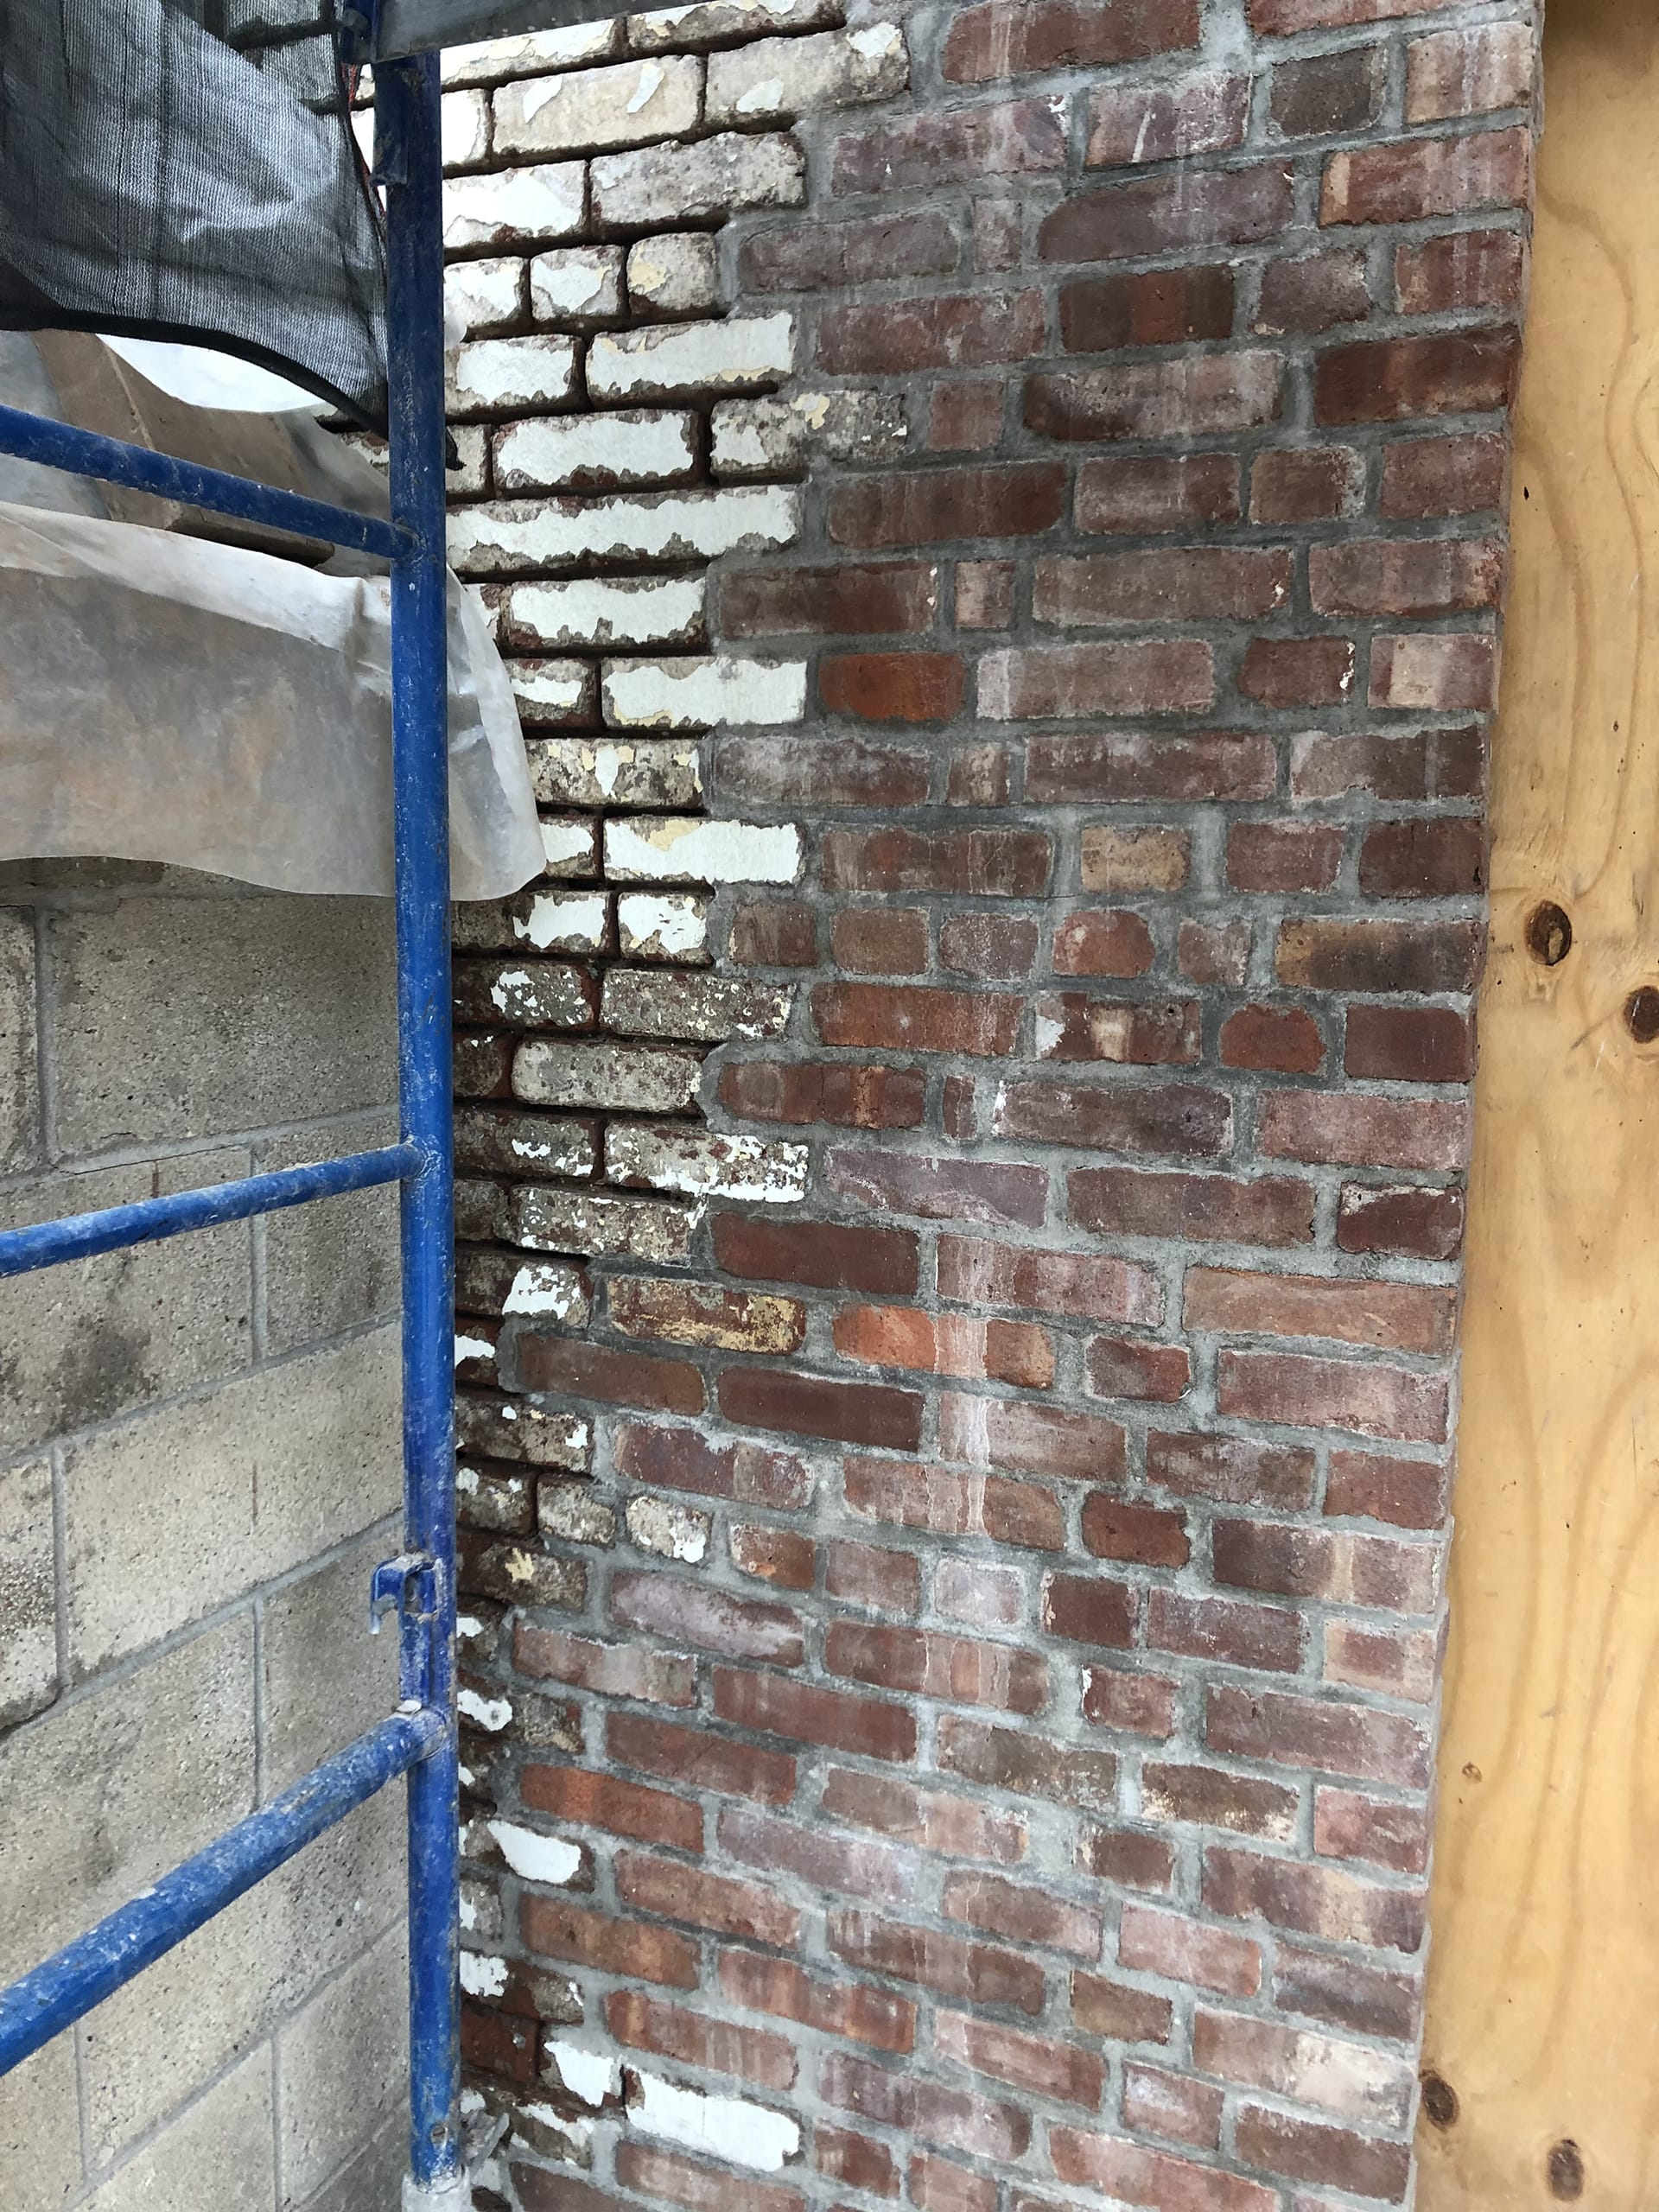 Brick next to a window opening in the process of removing the weatherproof coating from on top of it